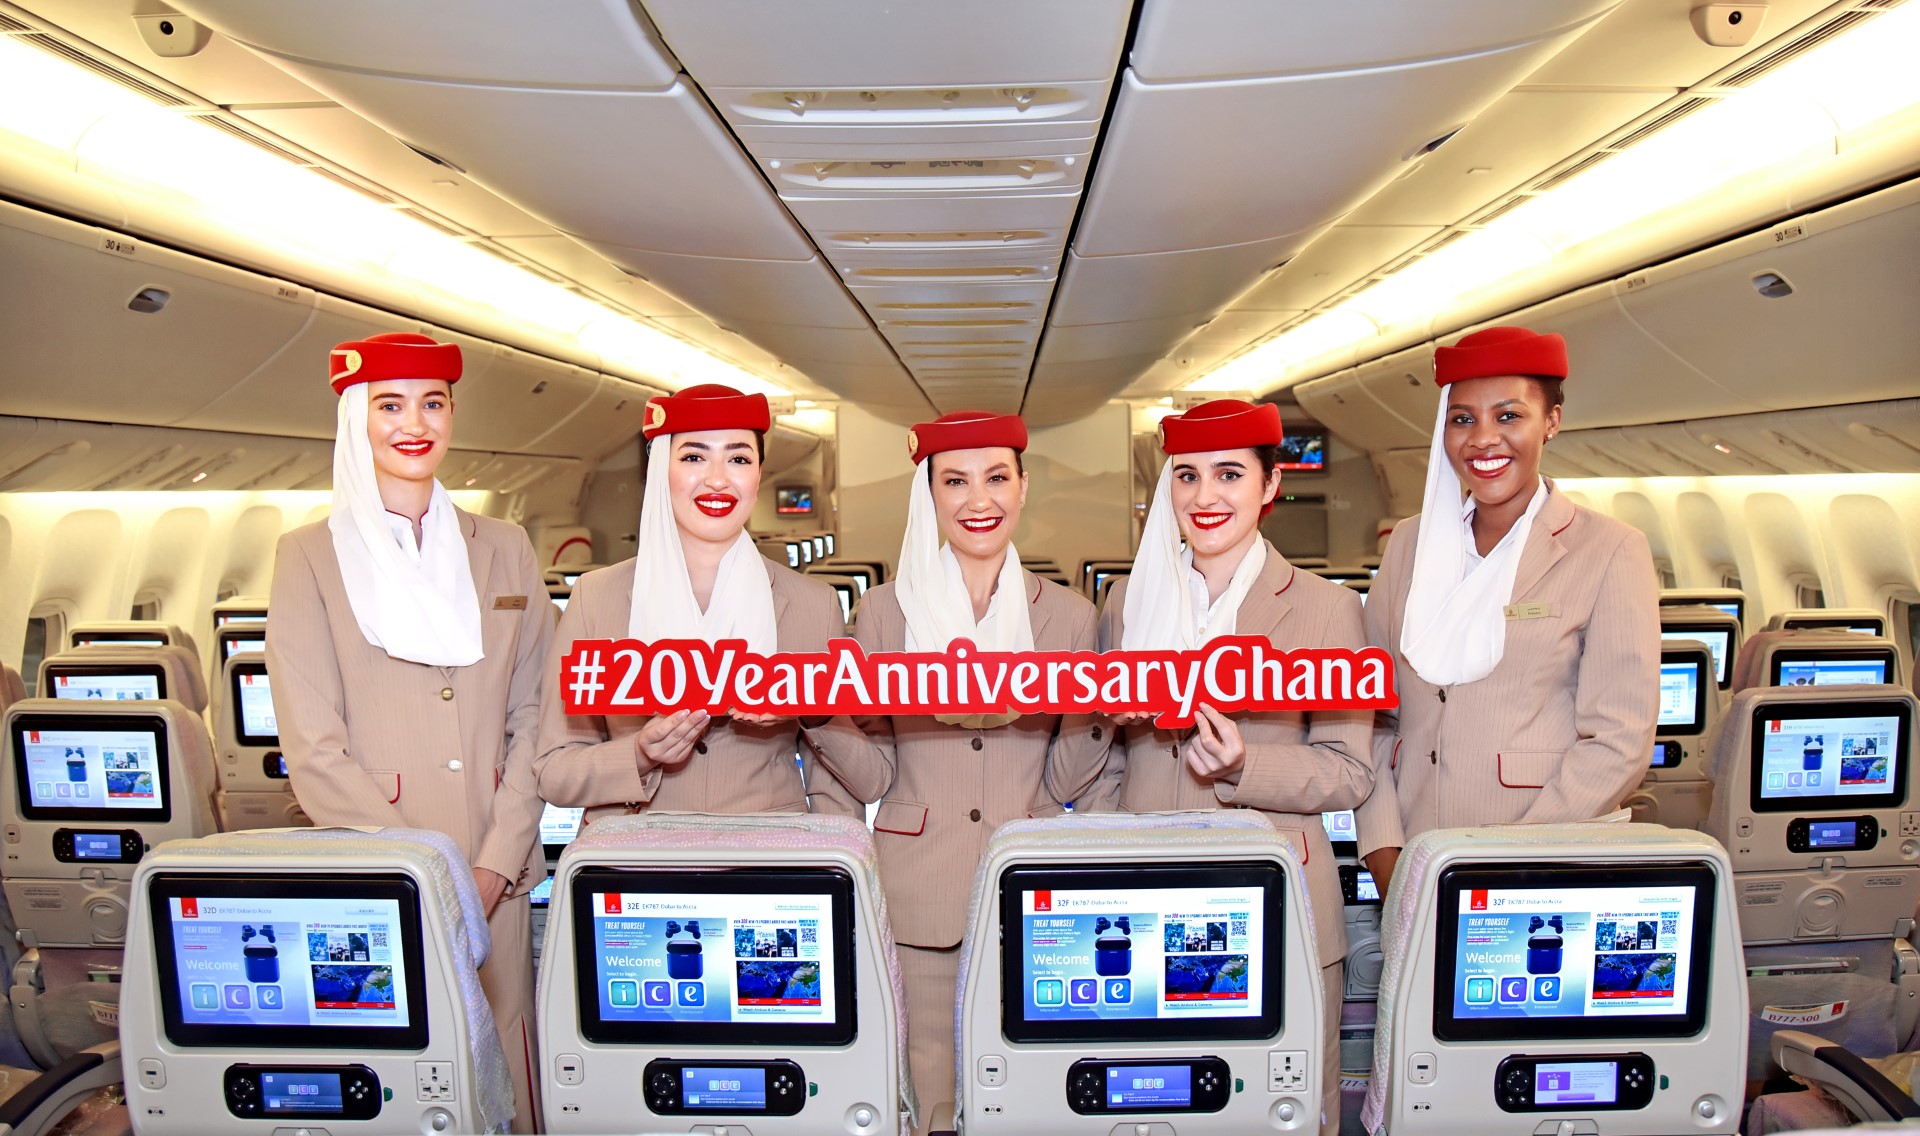 Emirates in Ghana marks 20th Anniversary